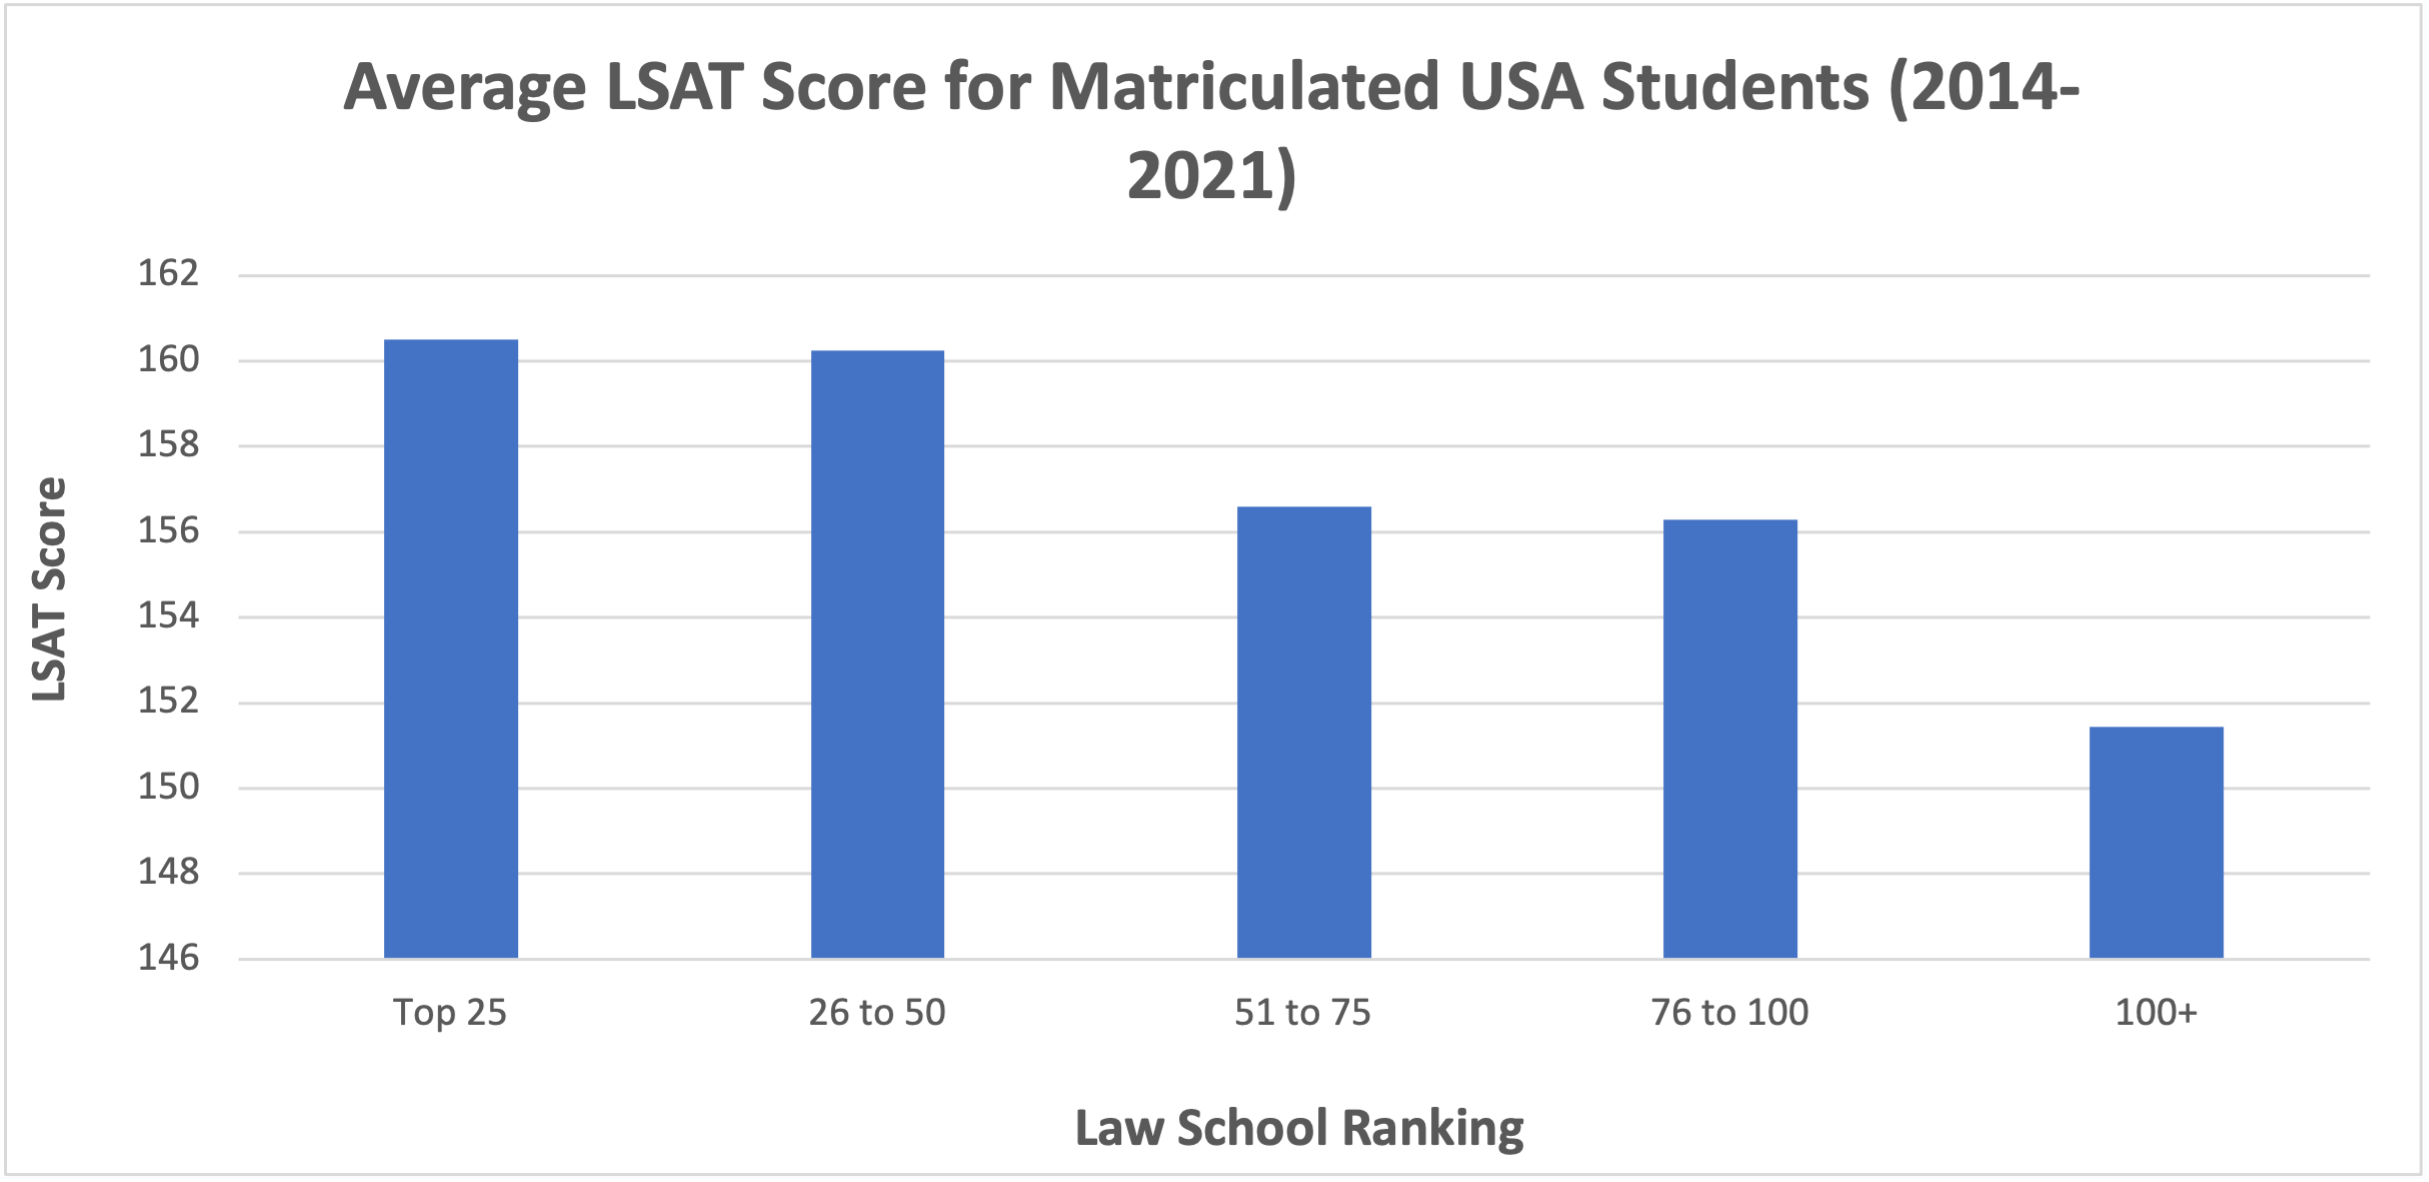 Average LSAT Score for Maticulated USA Students (2014 - 2021)